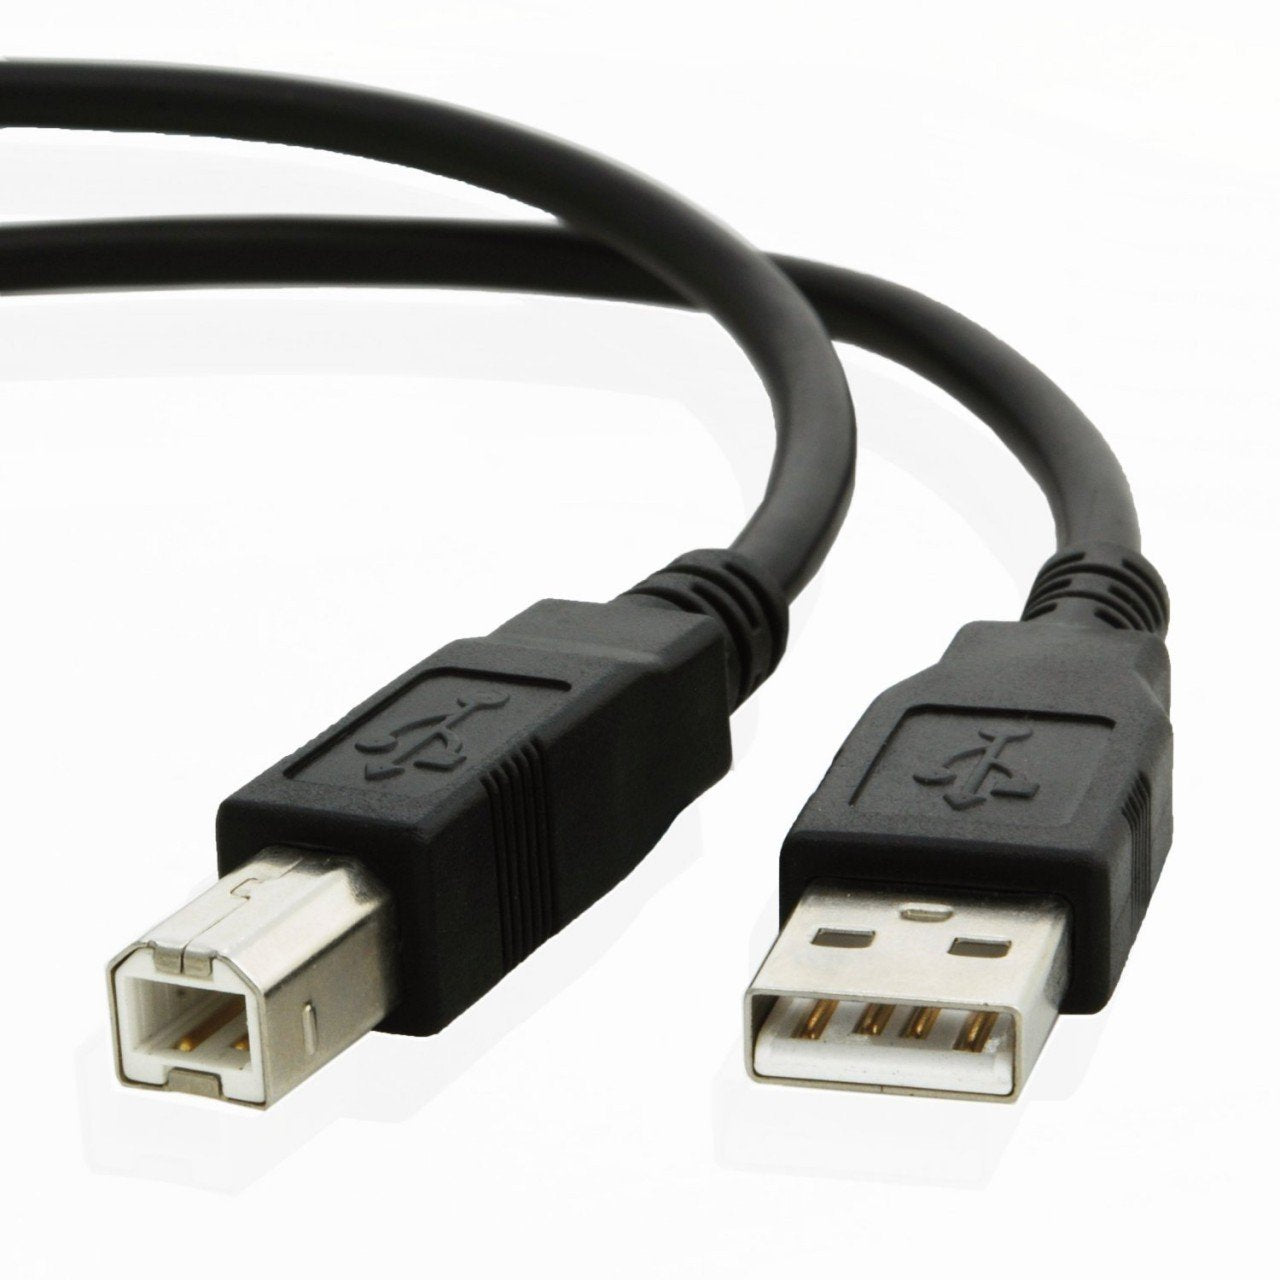 USB cable for Canon PIXMA iP2850